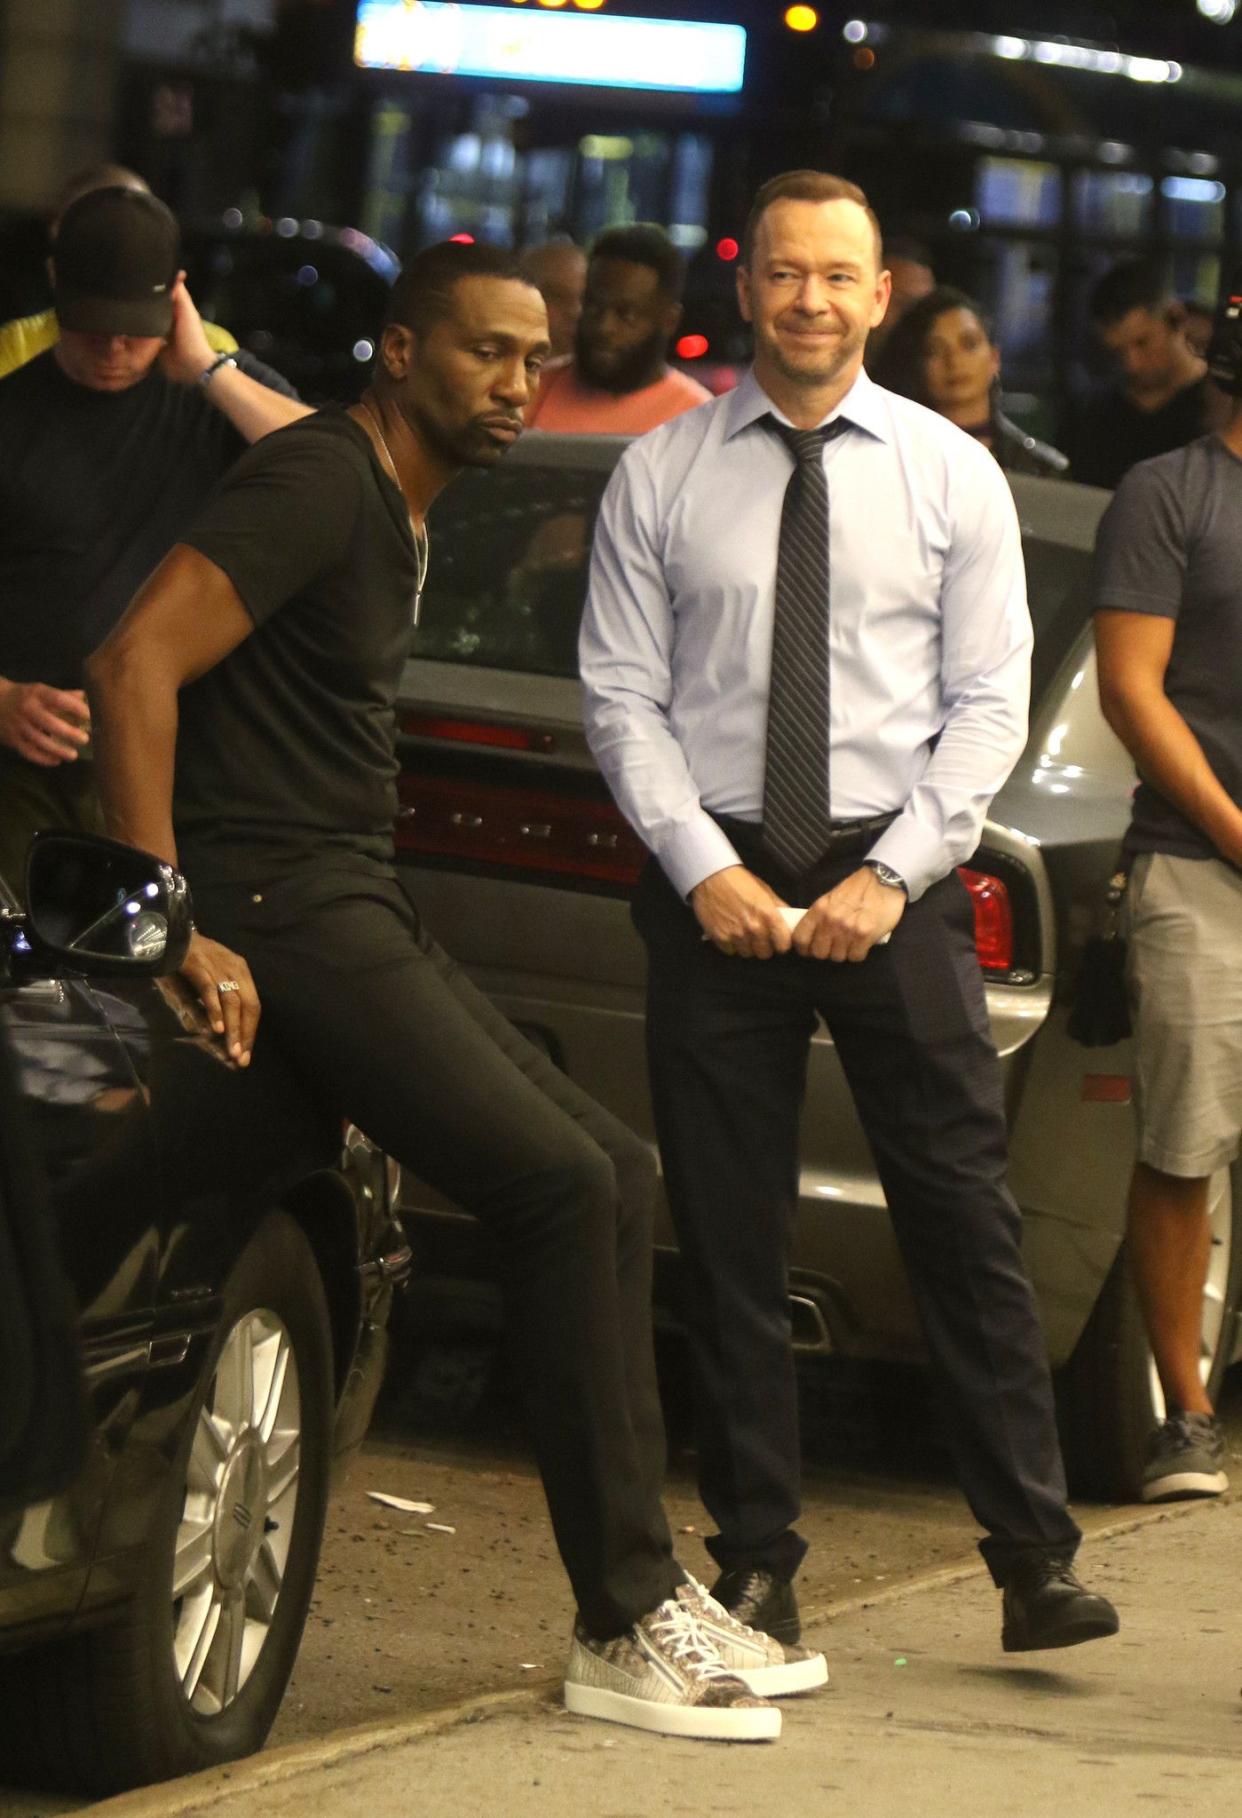 Donnie Wahlberg and Leon Robinson pictured filming a crime scene at the "Blue Bloods" set in Midtown, Manhattan on Wednesday, Sept. 4, 2019.